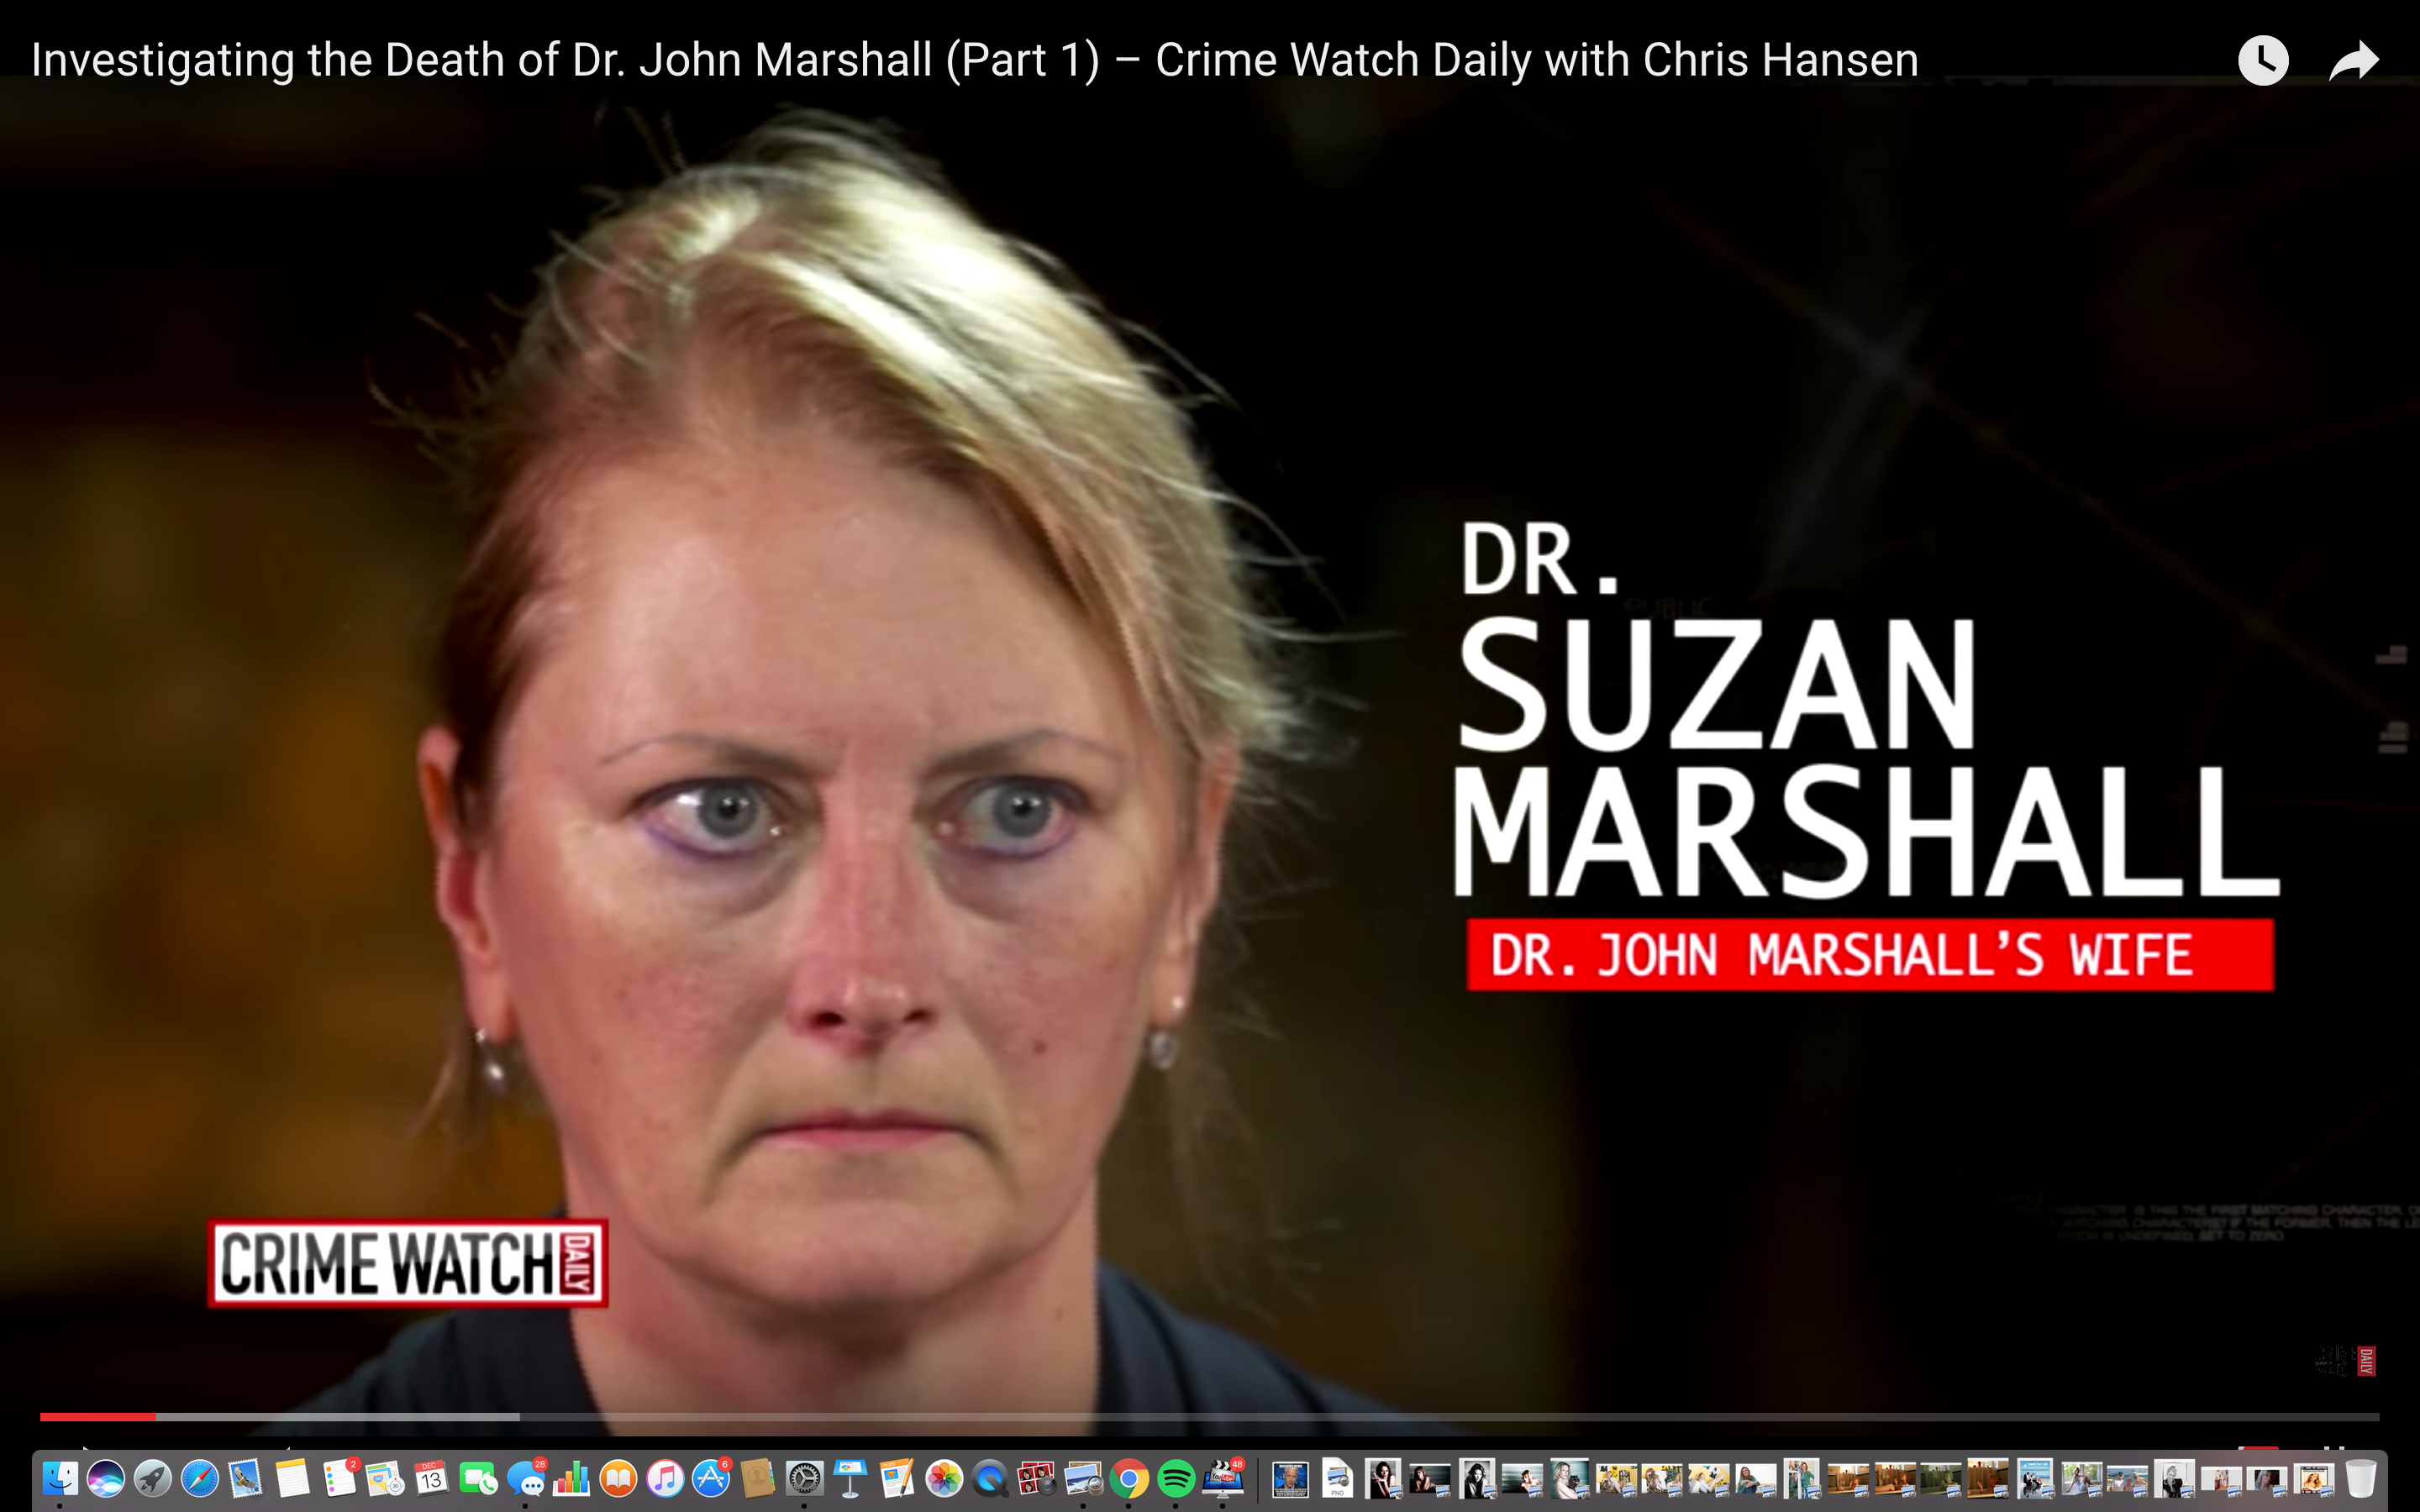 Video: Finally, Crimewatch Does TV Show on One of Our Doctor Death Stories